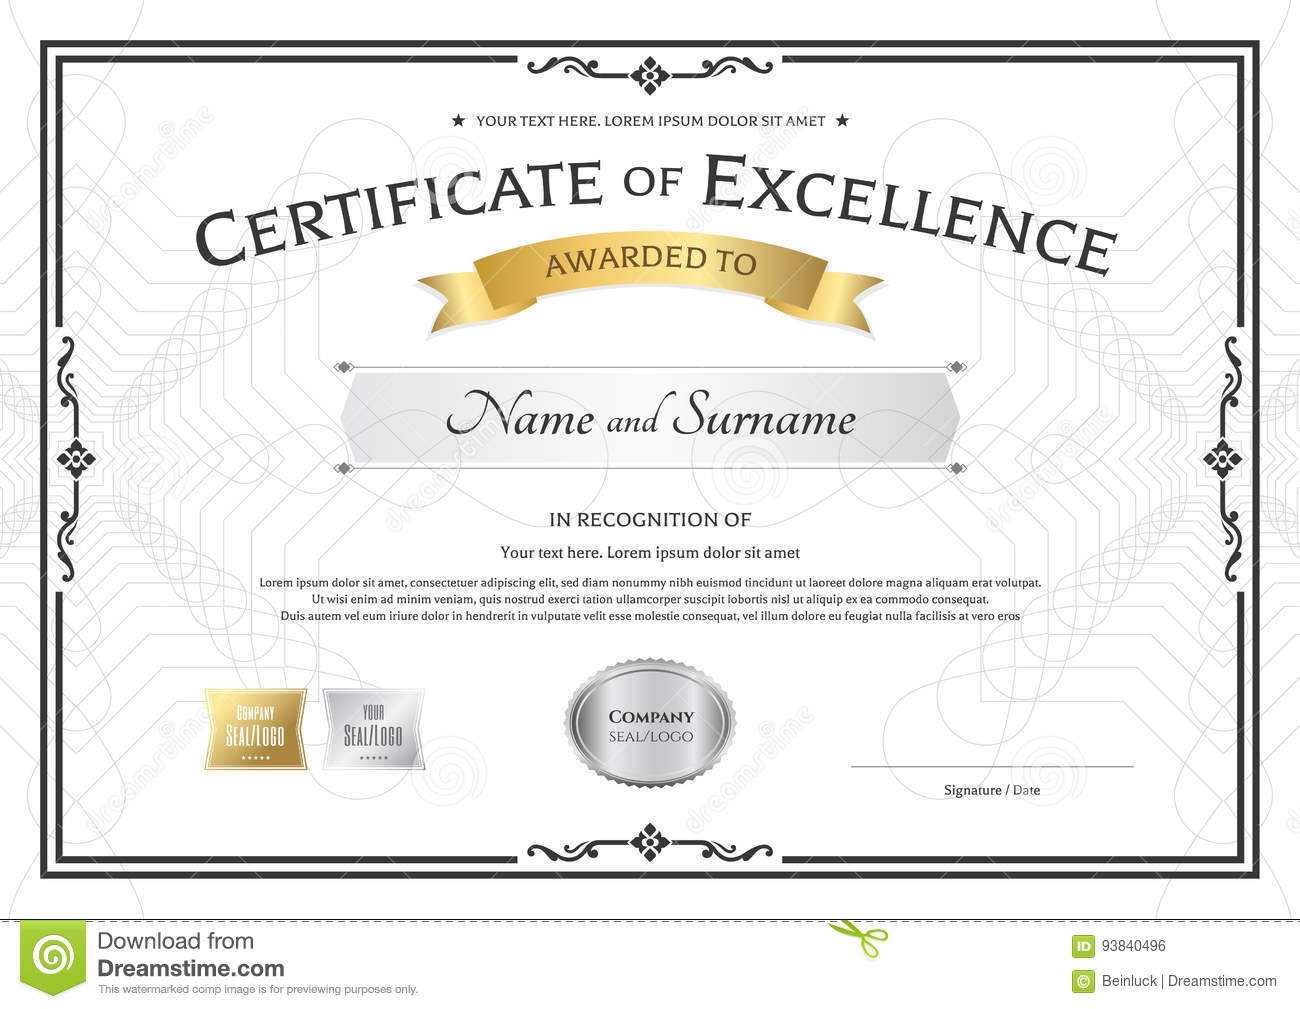 Certificate Of Excellence Template With Gold Award Ribbon On Throughout Award Of Excellence Certificate Template